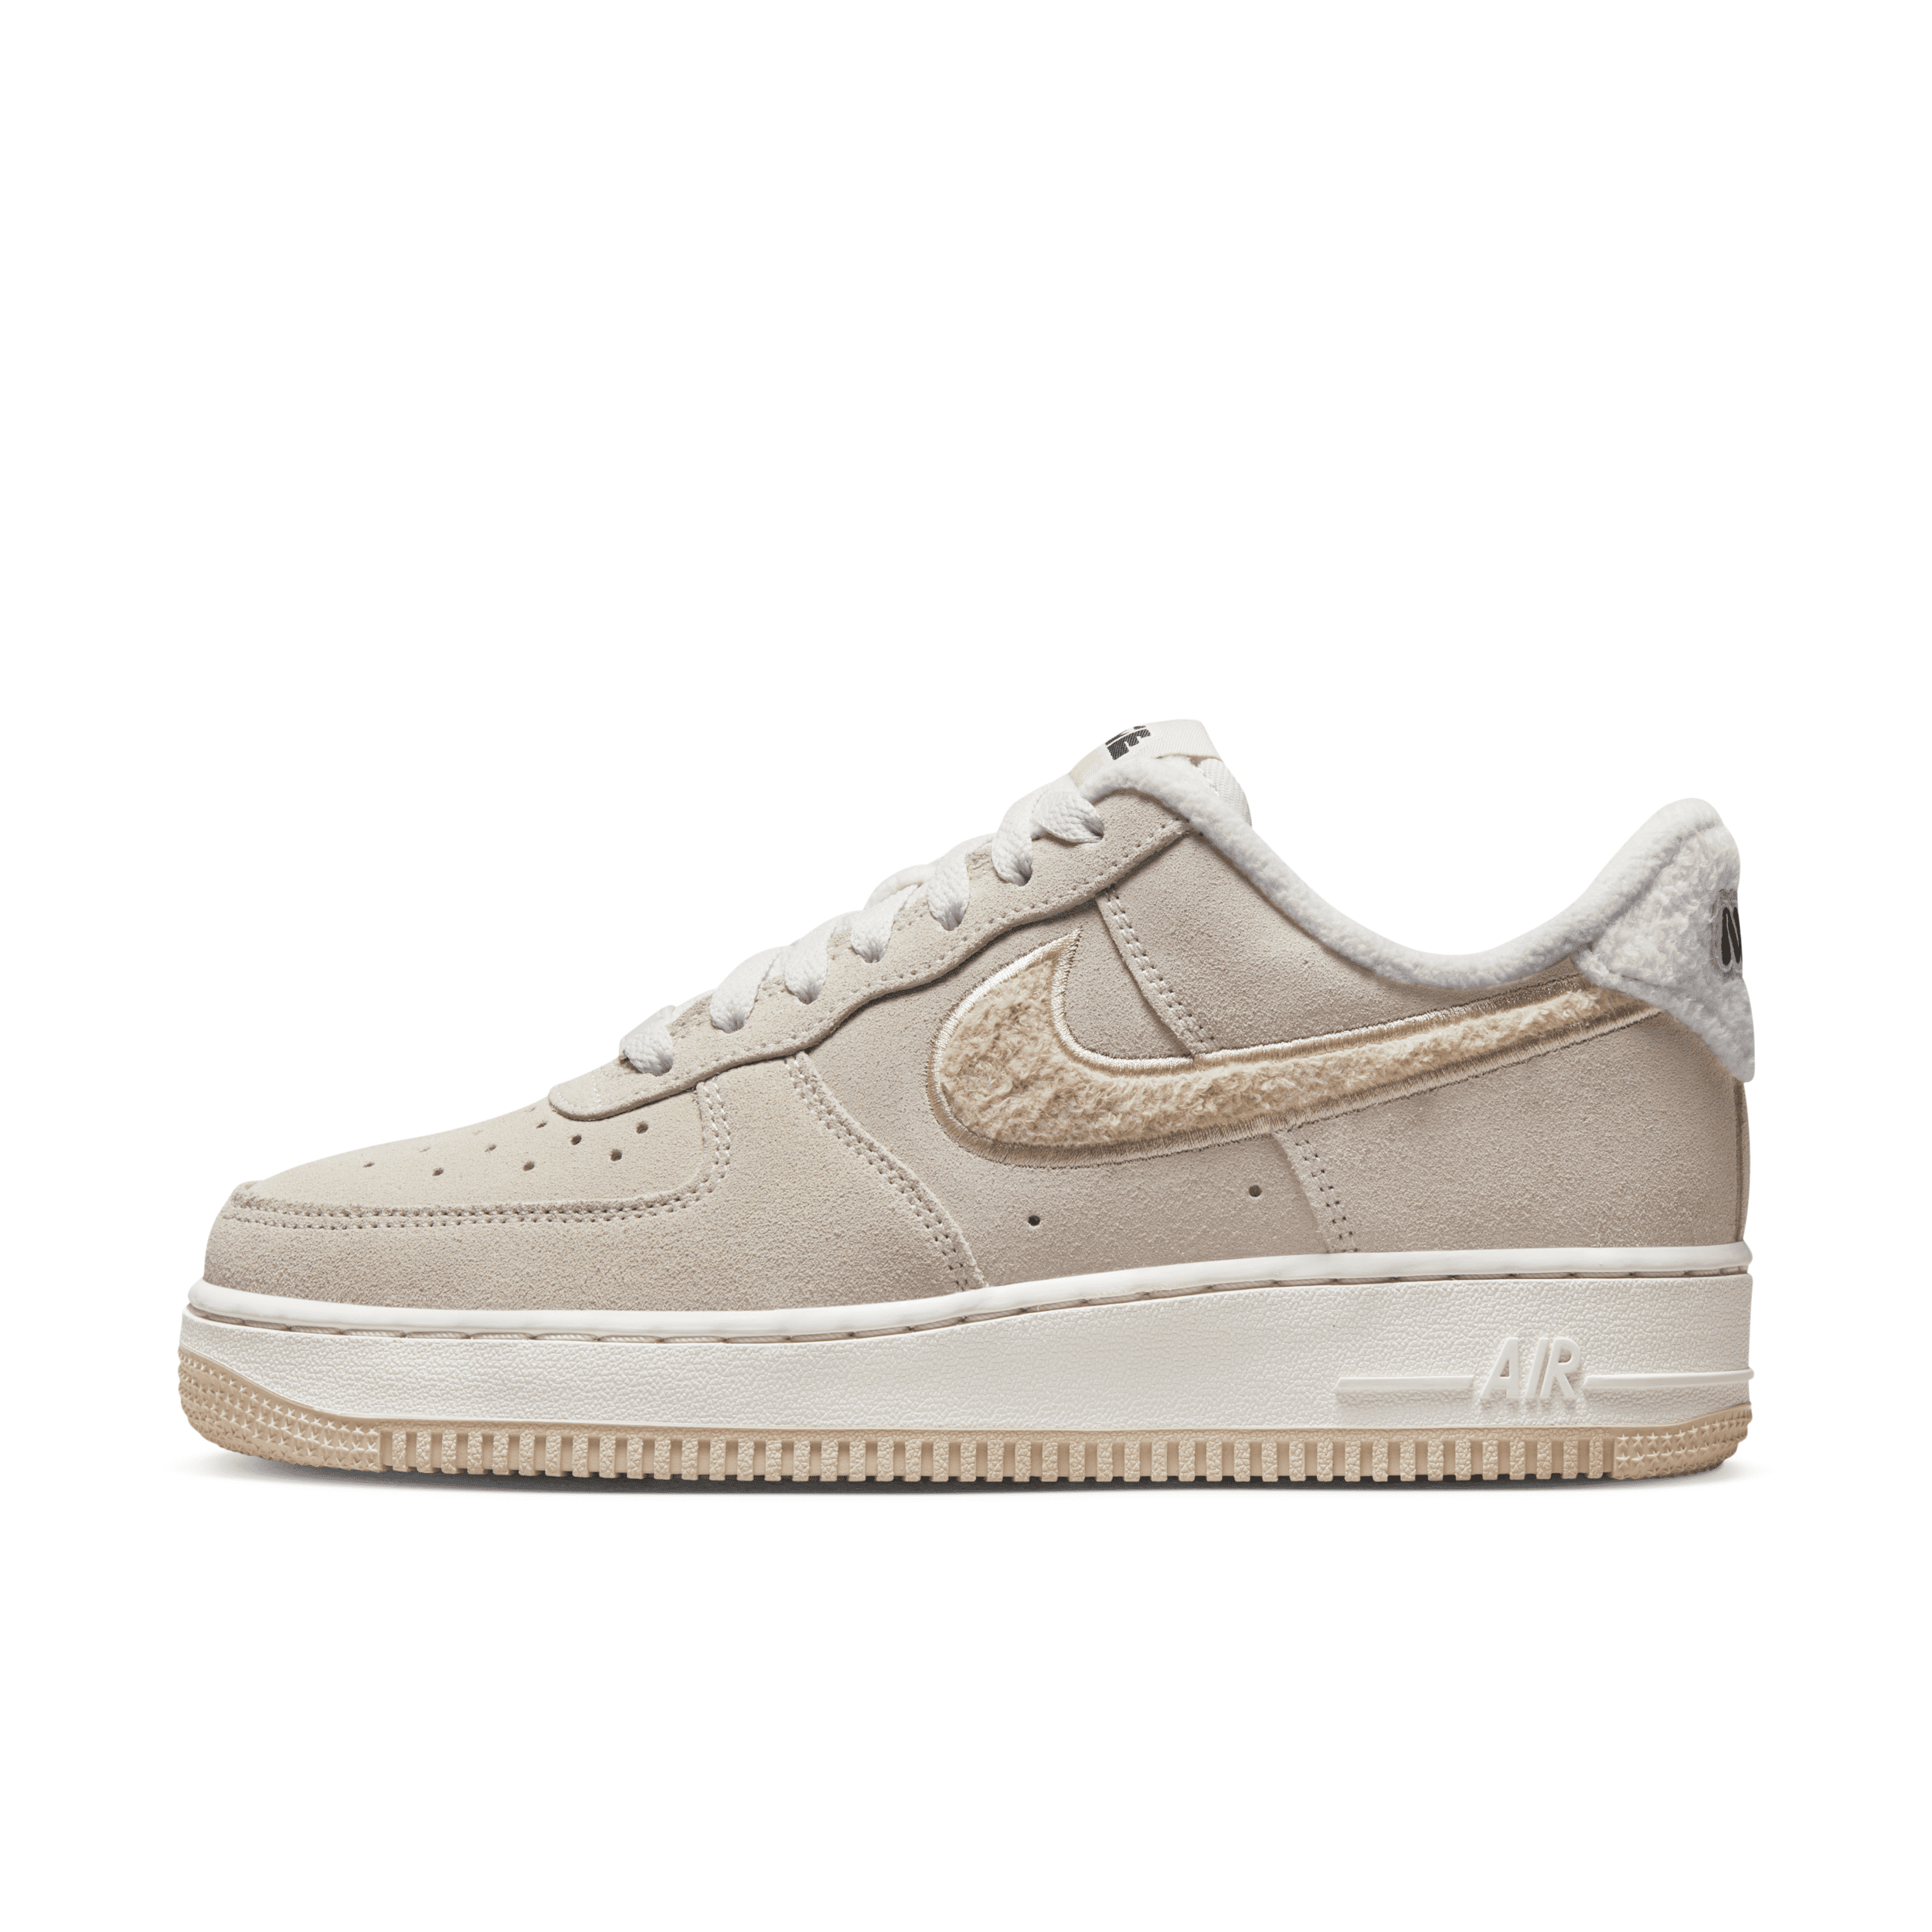 NIKE WOMEN'S AIR FORCE 1 '07 SE SHOES,14234842